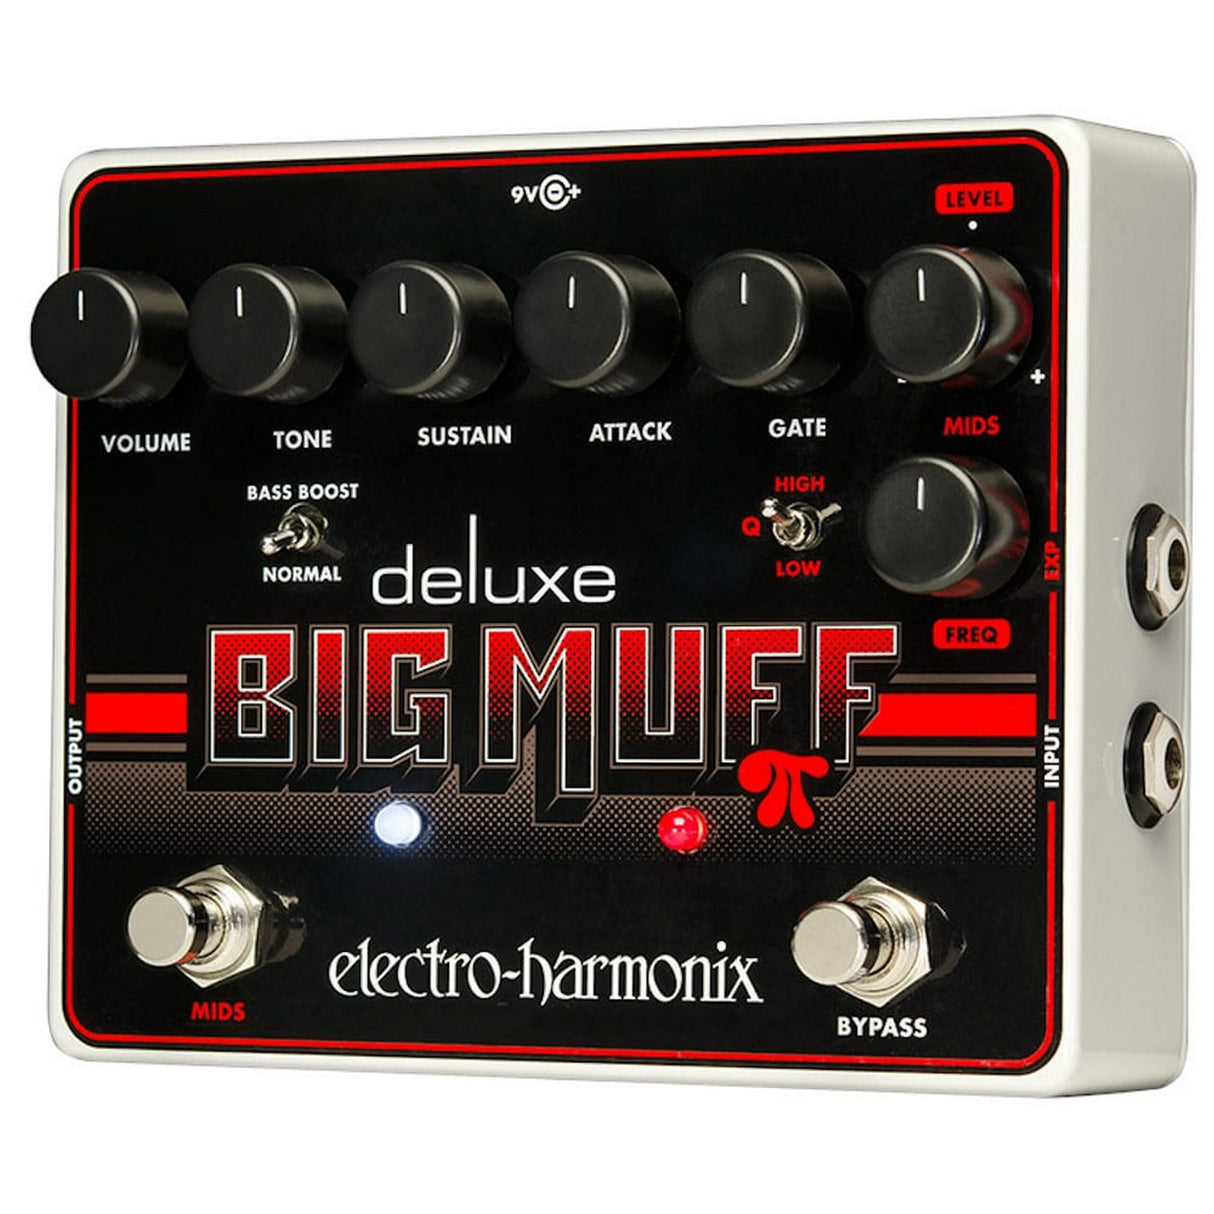 Electro-Harmonix Deluxe Big Muff Pi Fuzz/Distortion/Sustainer Guitar Effects Pedal